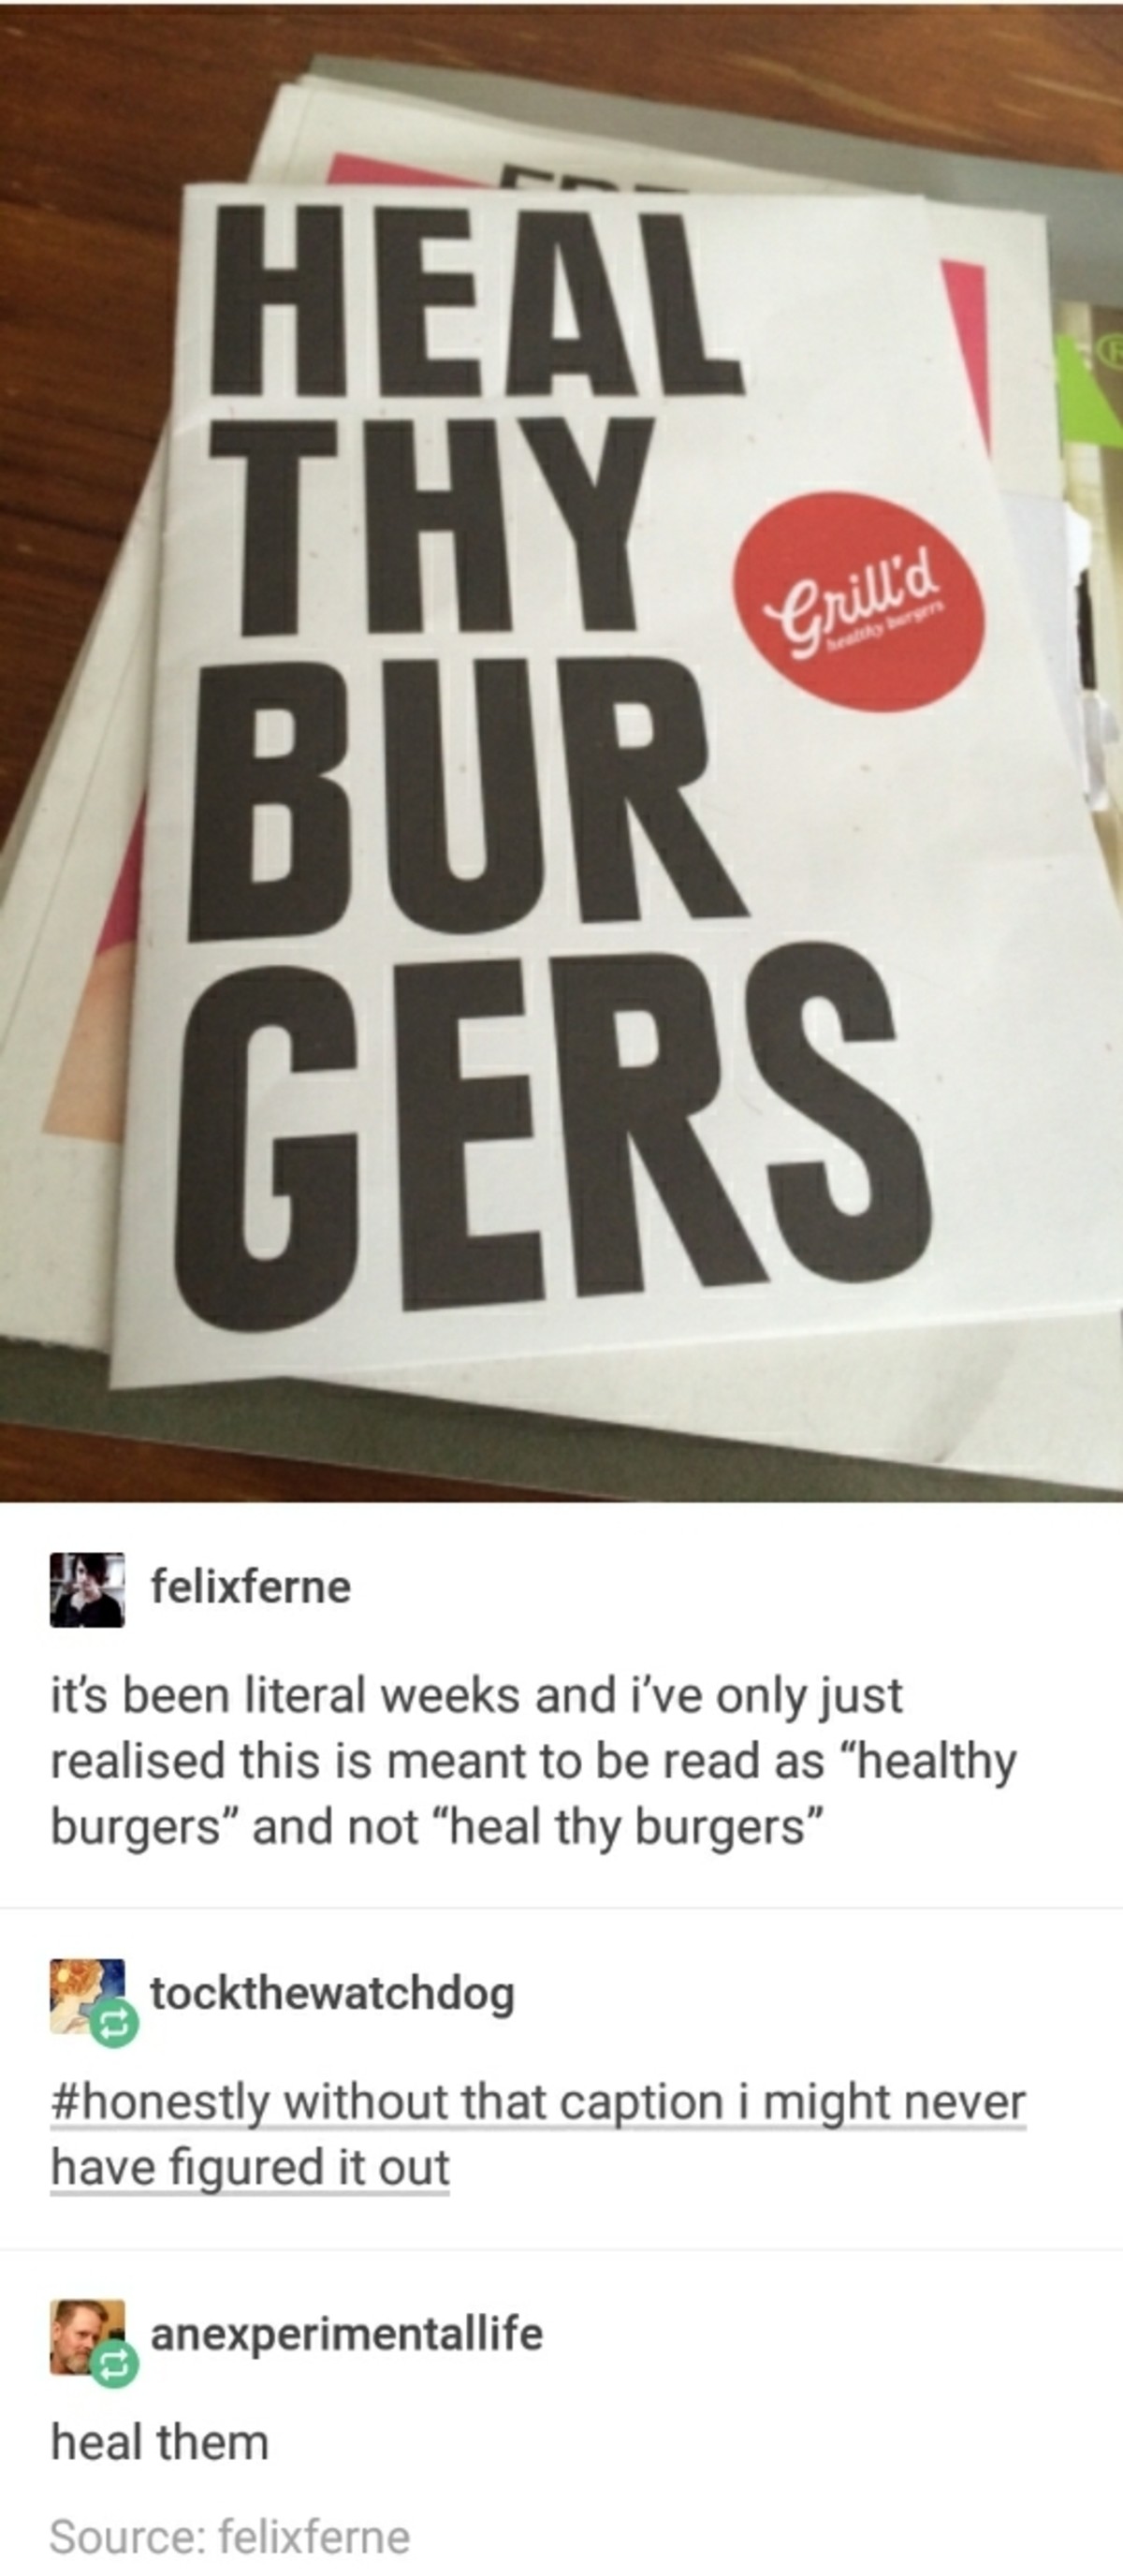 Heal Thy Bur Gers. . H Ell T dily til it' s been literal weeks and We realised this is meant to be read as "healthy burgers" and not "heal thy burgers" allieb h